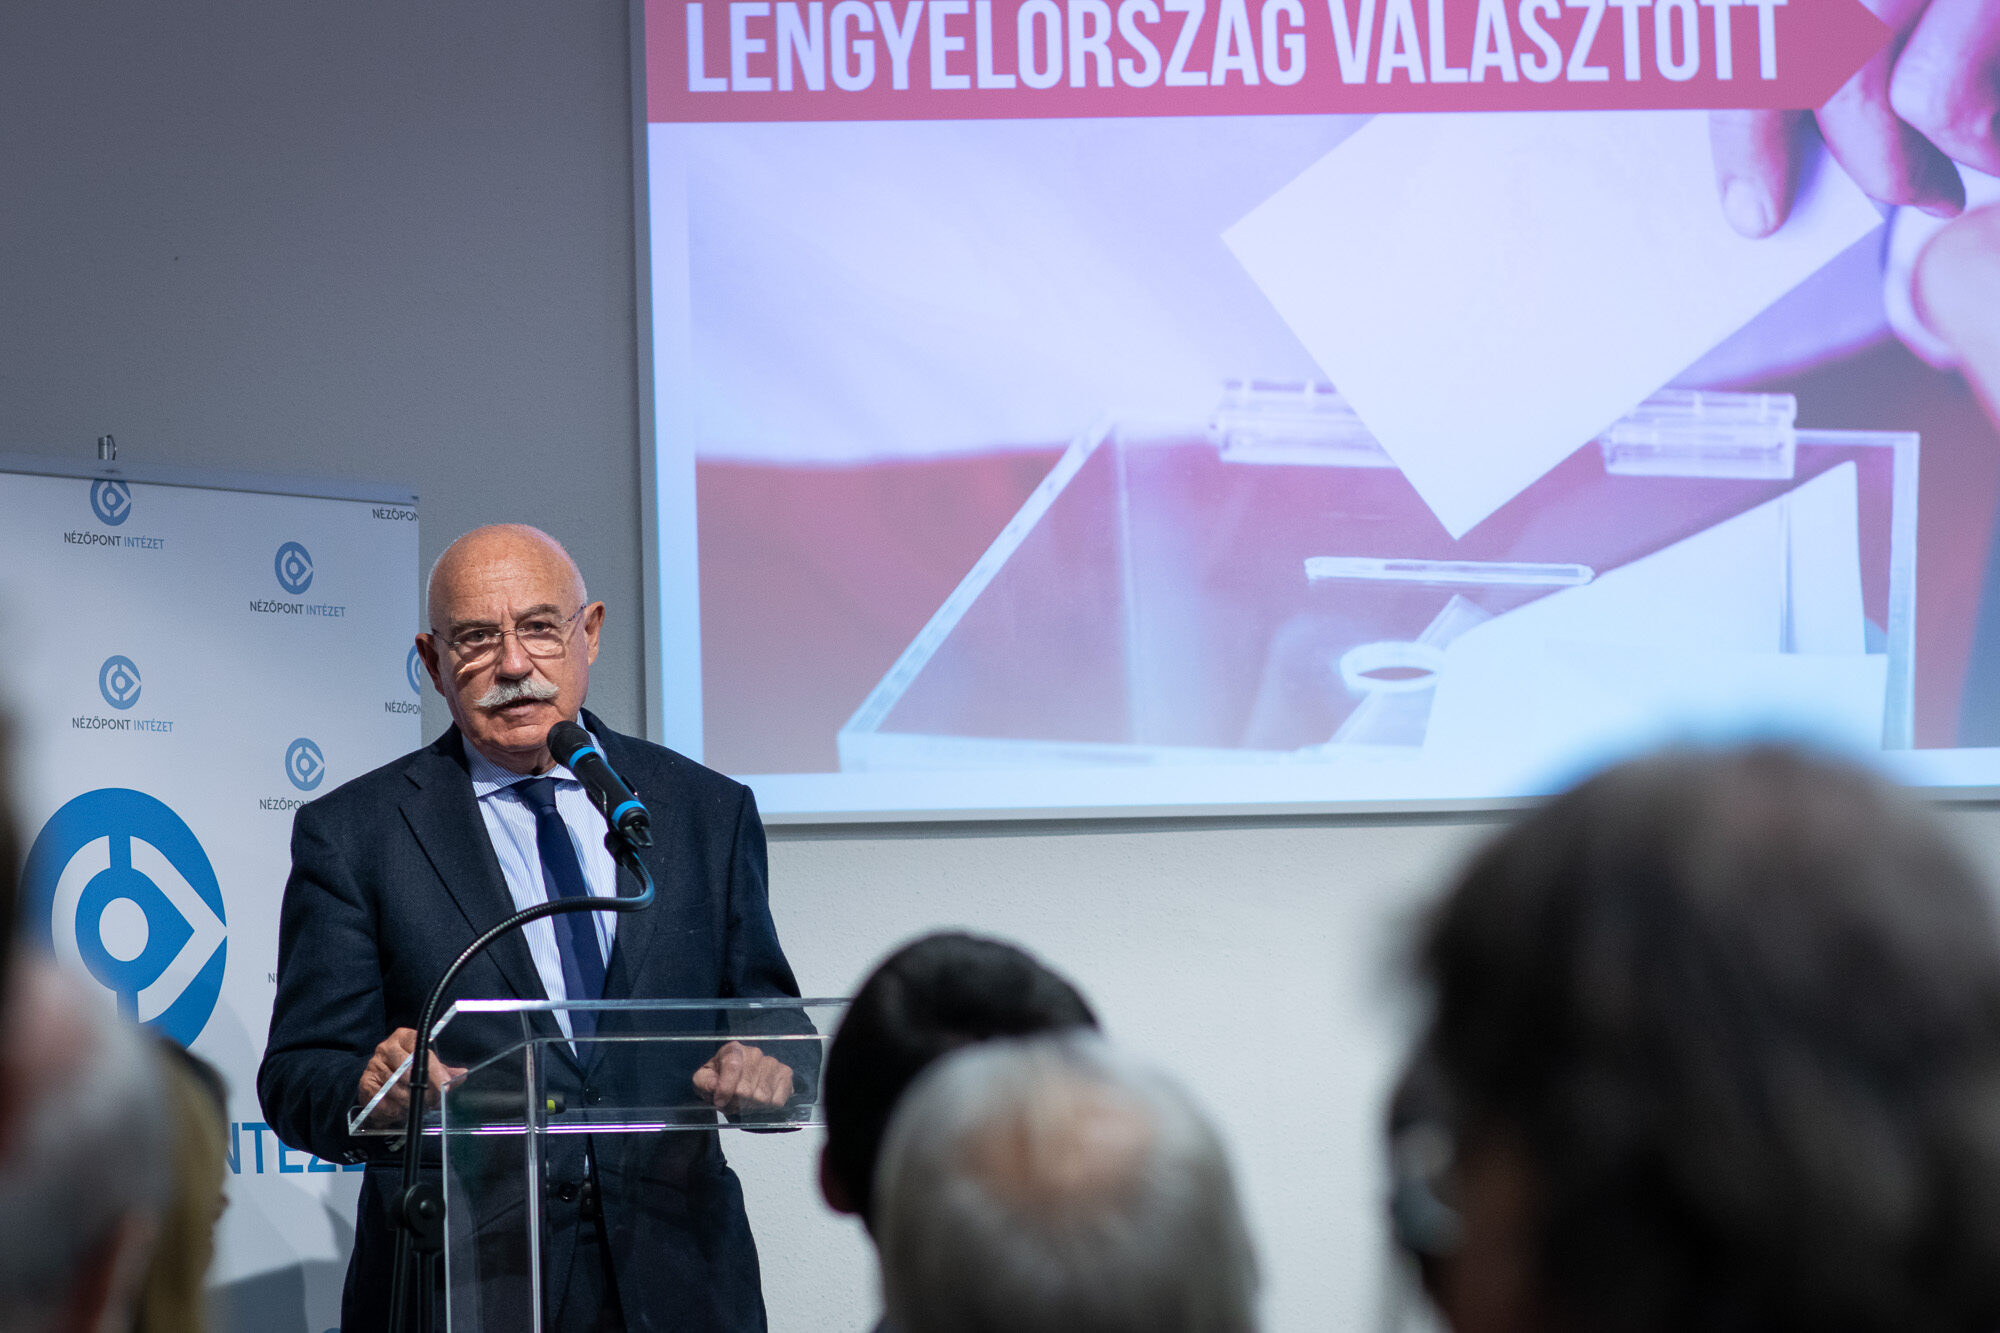 „DIGNITY AND PROSPERITY” – CONFERENCE ON THE BACKGROUND OF THE POLISH LAW AND JUSTICE PARTY’S RECORD VICTORY